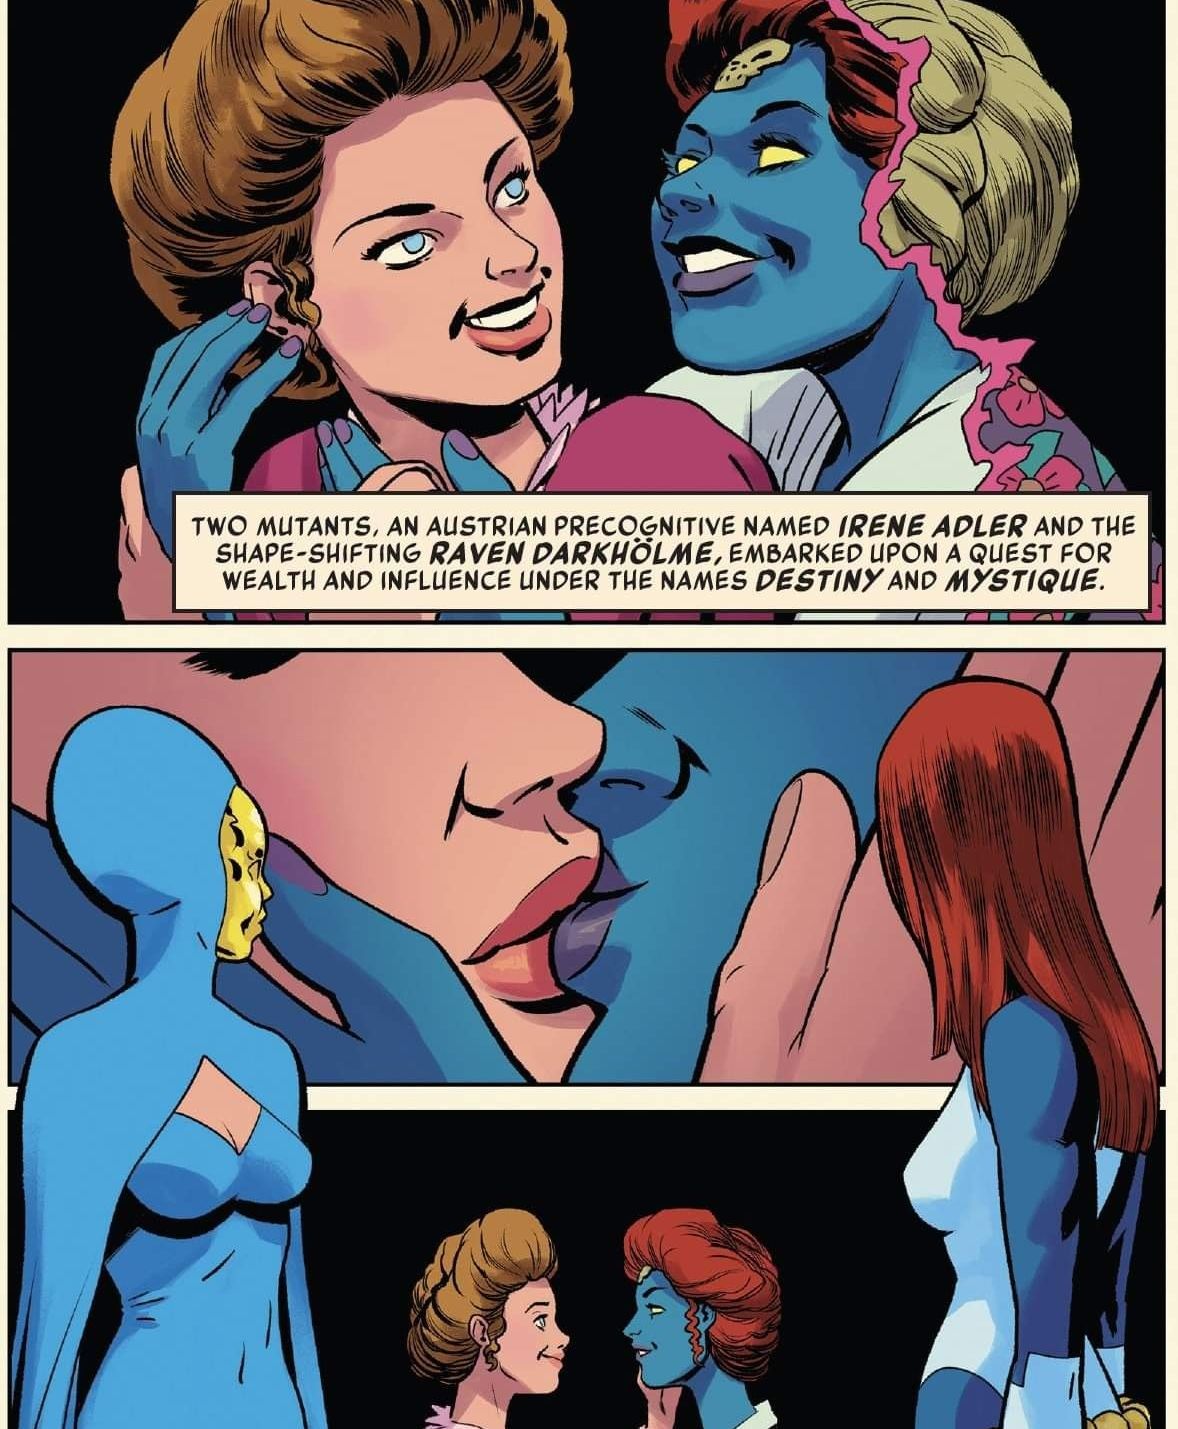 Destiny talking to Mystique reflecting on an intimate moment and kissing.